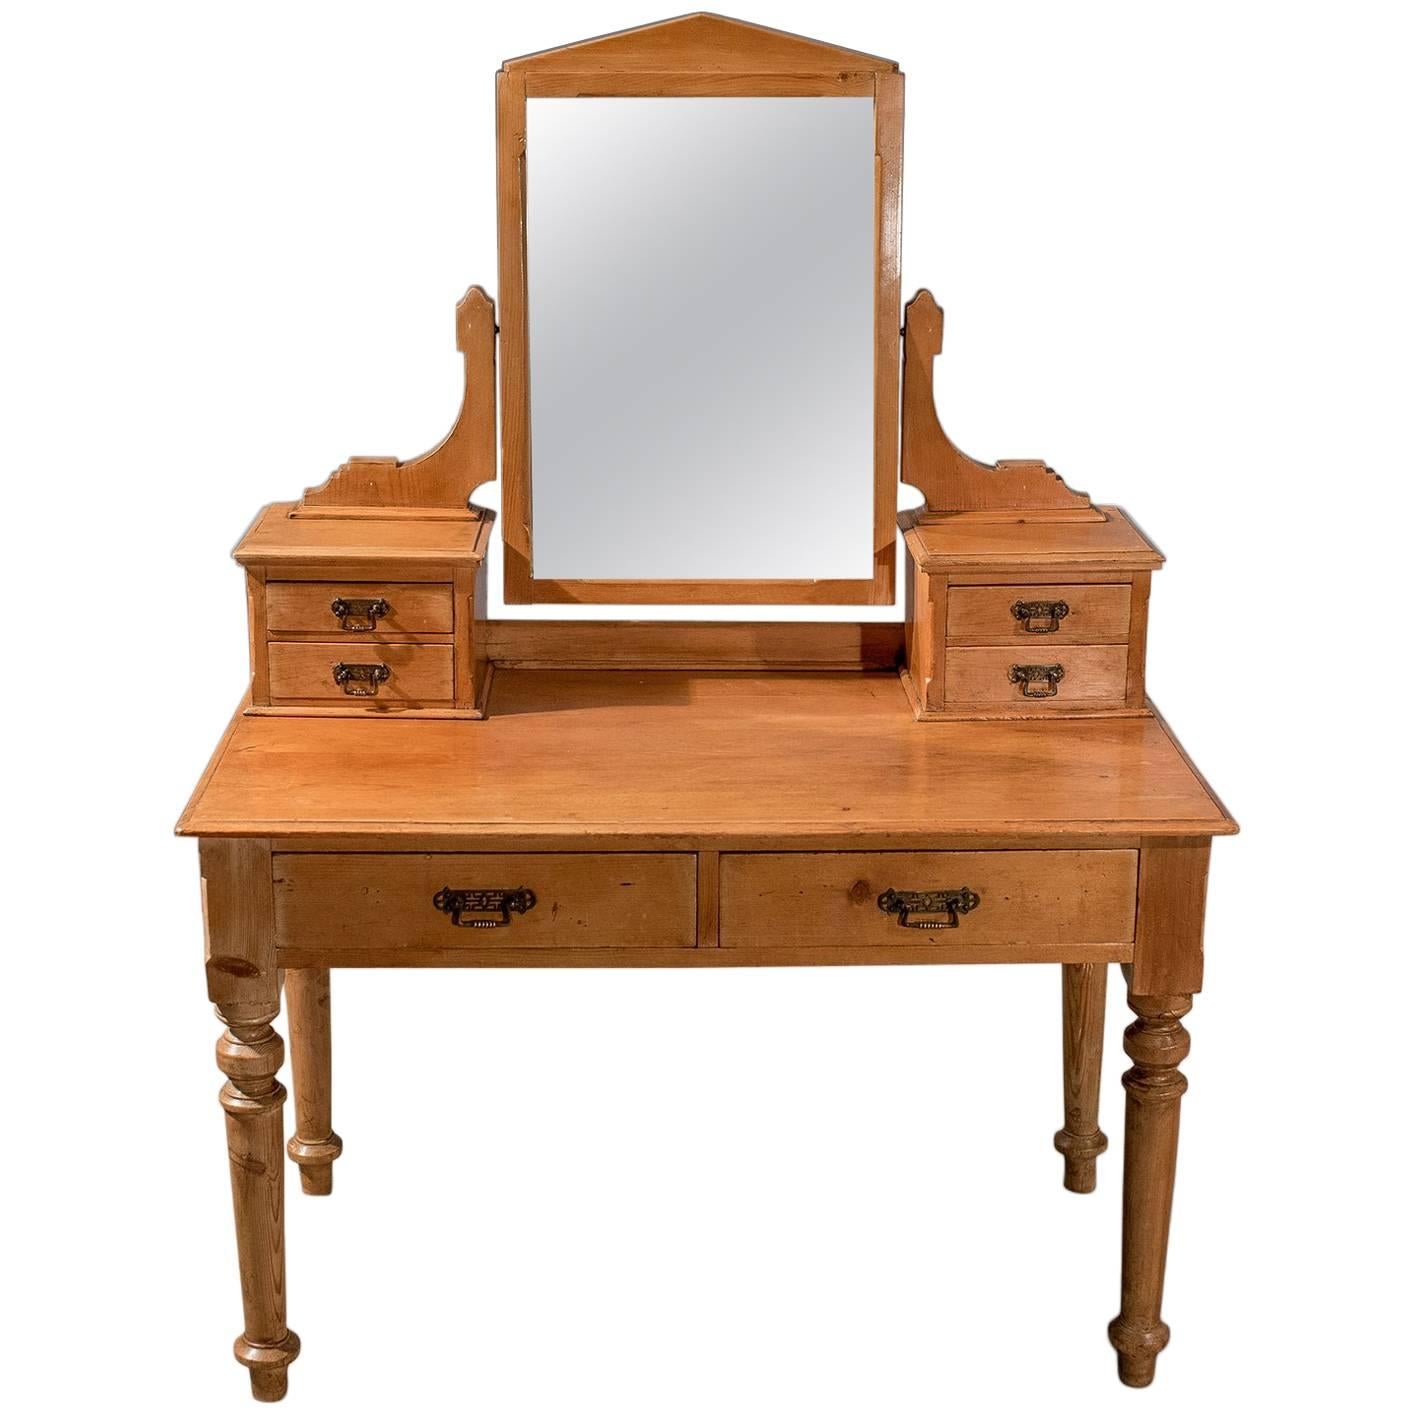 Antique Dressing Table, Victorian Pine, Mirrored Vanity Bedroom Stand